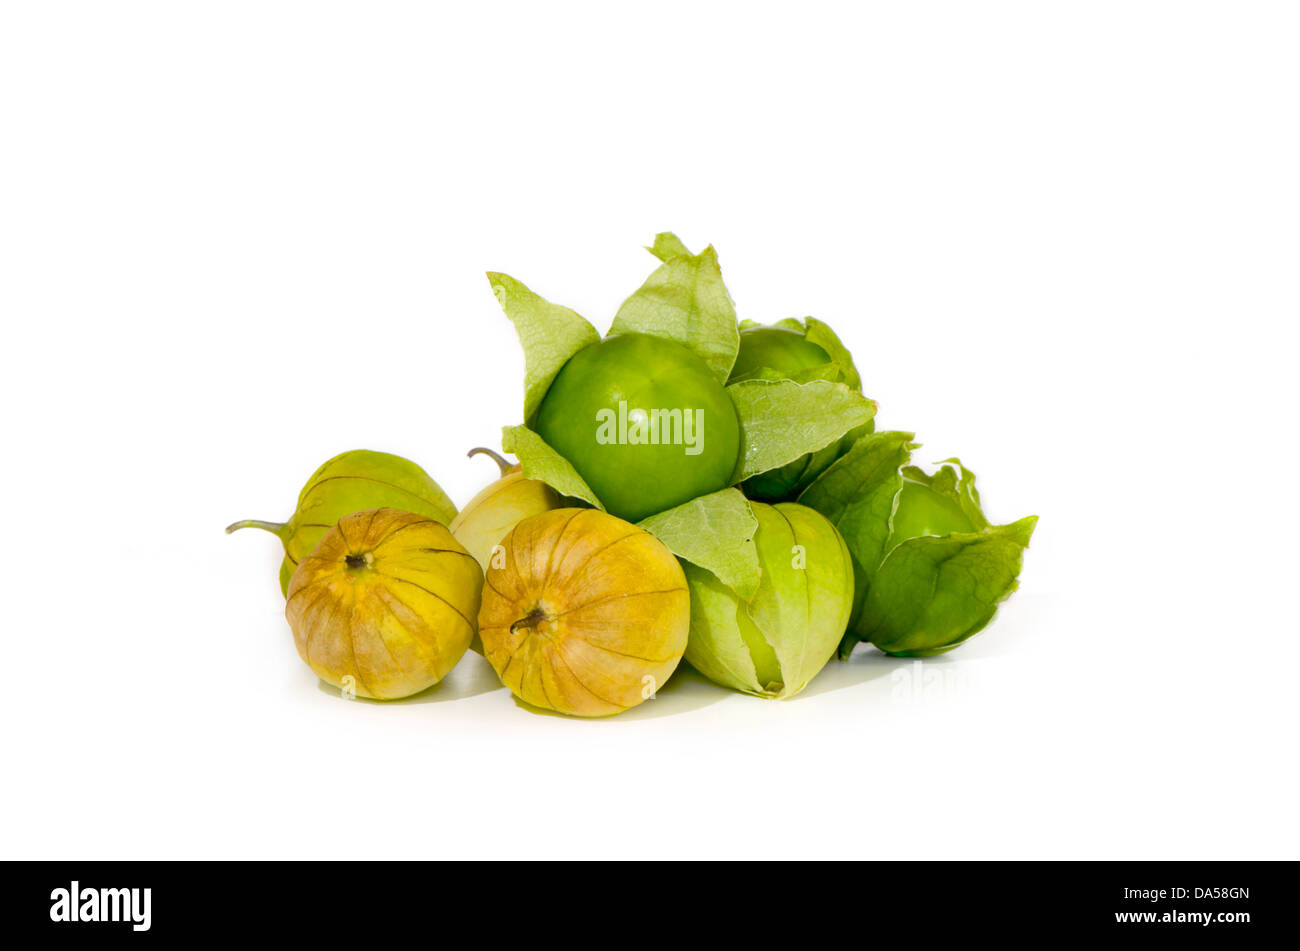 Close-up of Green tomatillos, Physalis philadelphica, fruit on white background. Stock Photo